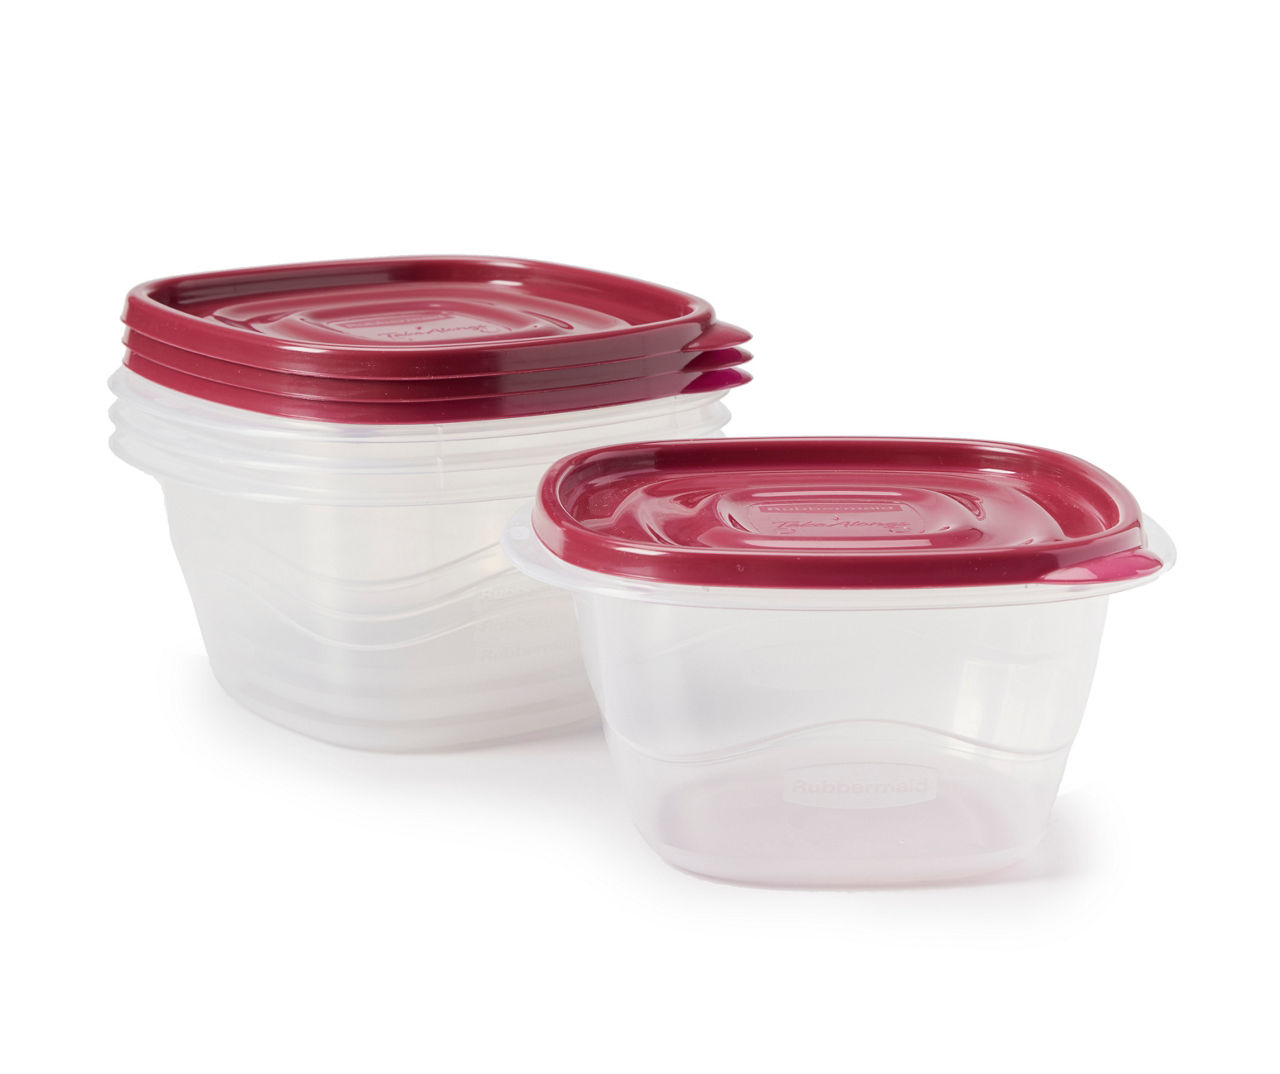 Rubbermaid Easy Find Lid 7-Cup Food Storage Container, Red